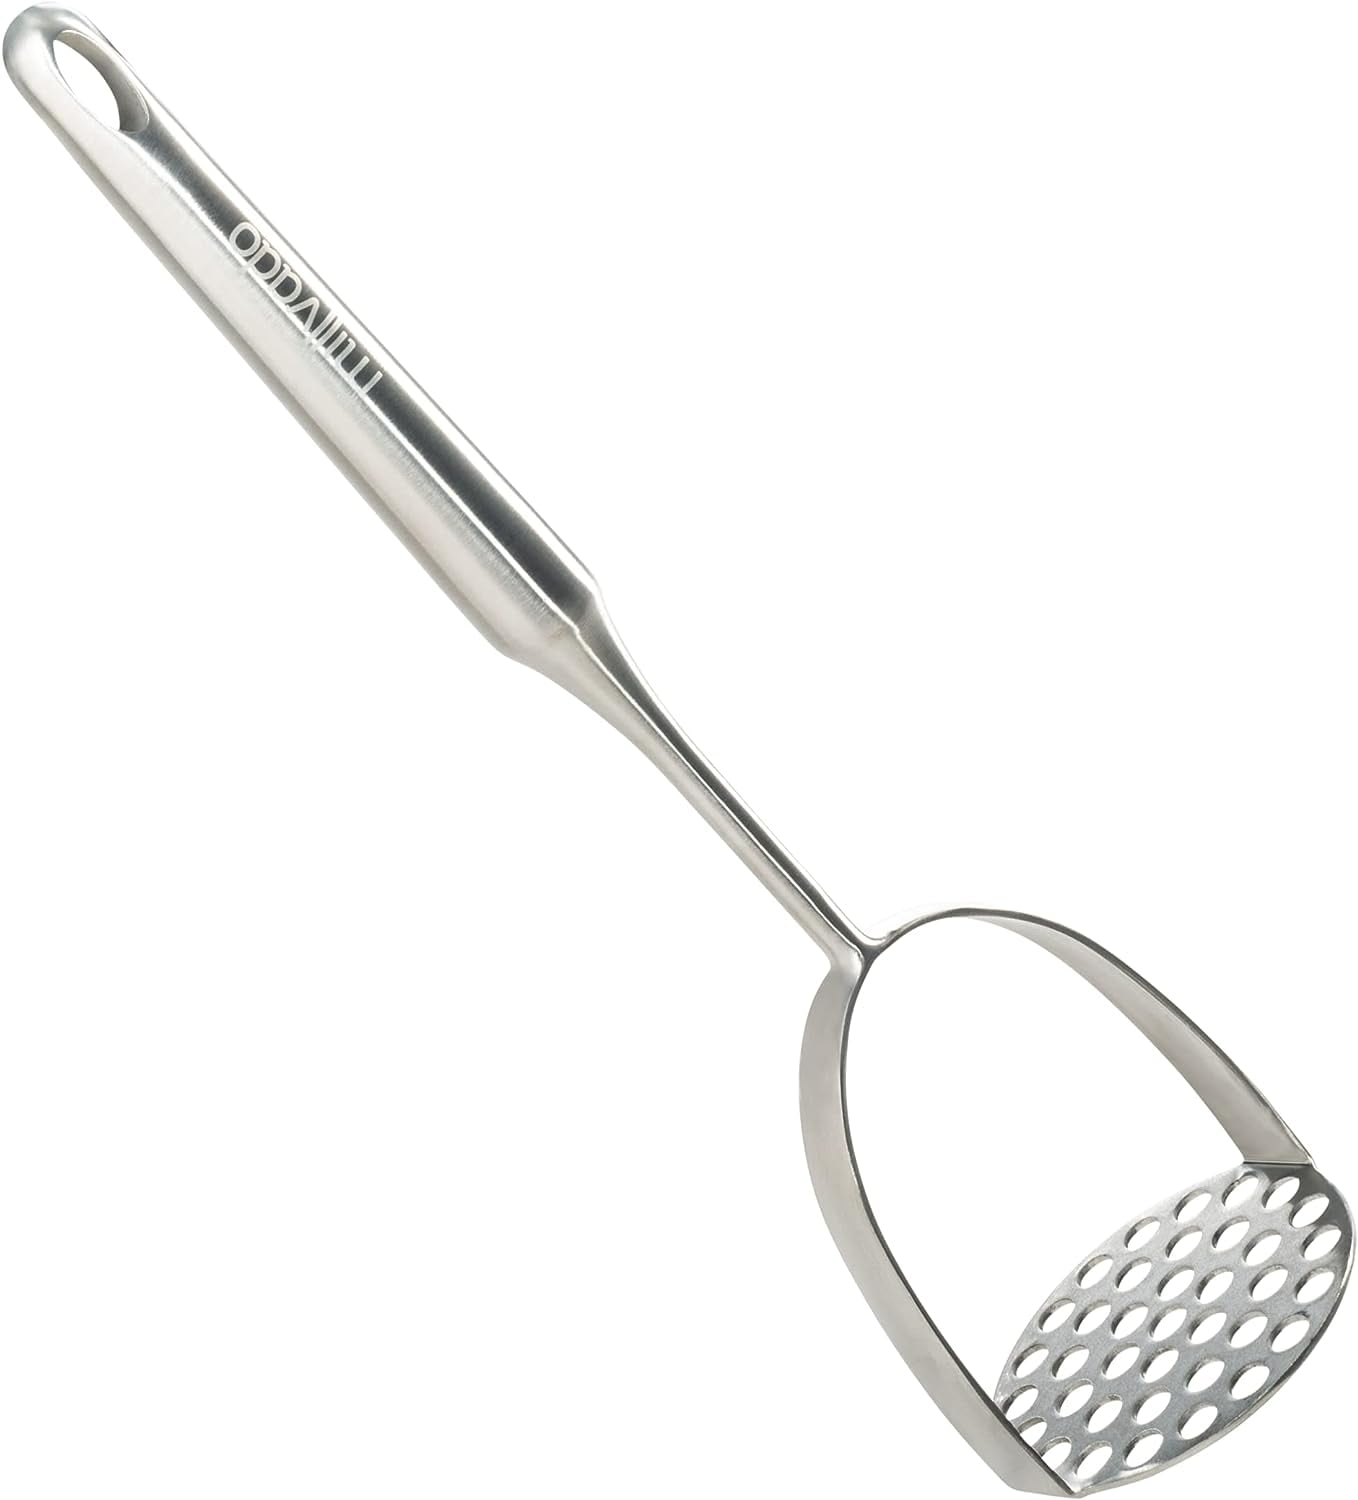 Millvado Potato Masher, Strong Stainless Steel Handle with Heavy Duty  Plastic Base, 11.5 Inch Blue Mashed Potatos Masher, Hand Smasher for  Vegtables